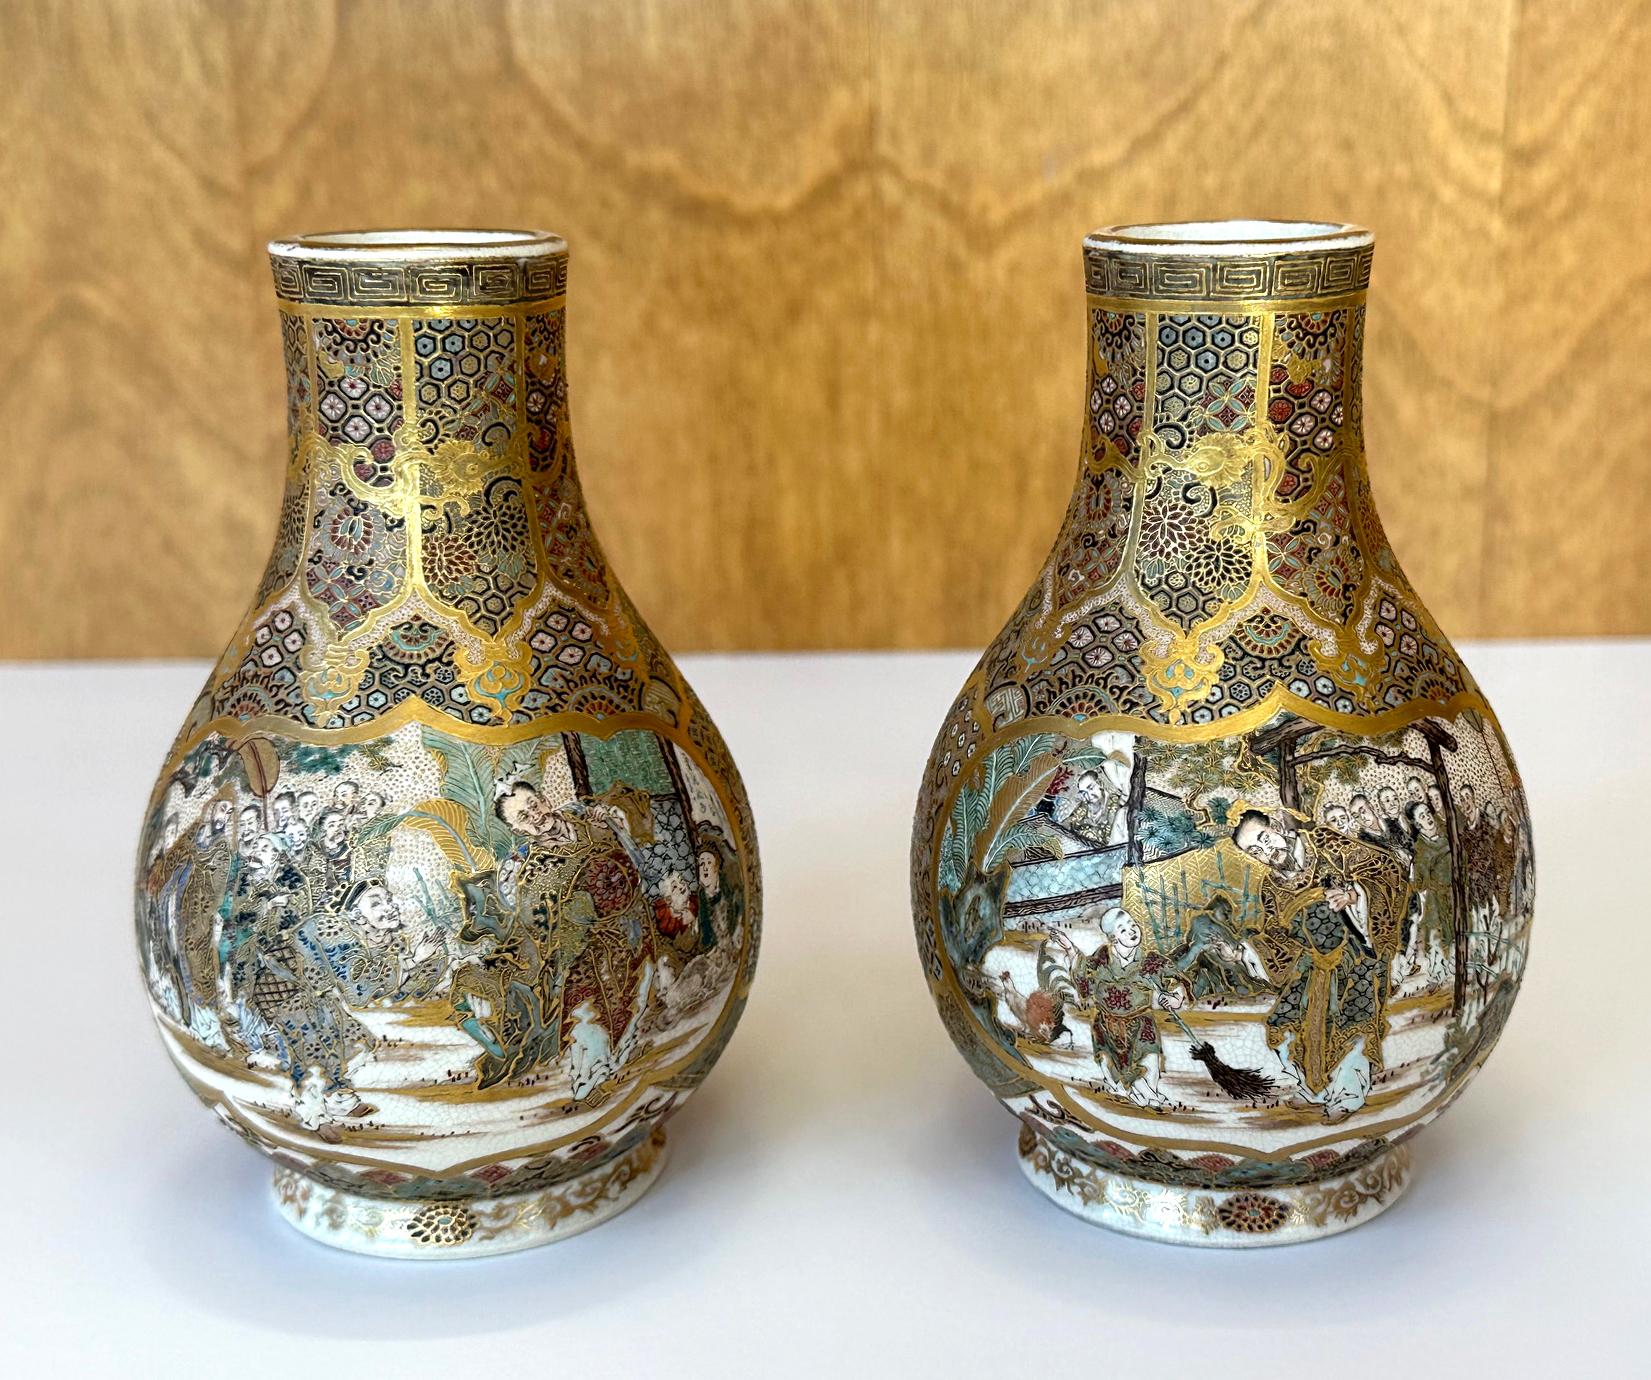 A pair of small ceramic vases with superb surface decorations made by Japanese studio Seikozan circa 1890-1910s (late Meiji Period). One of the many artist studios that specialized in satsuma ware, Seikozan was perhaps a handful exceptional